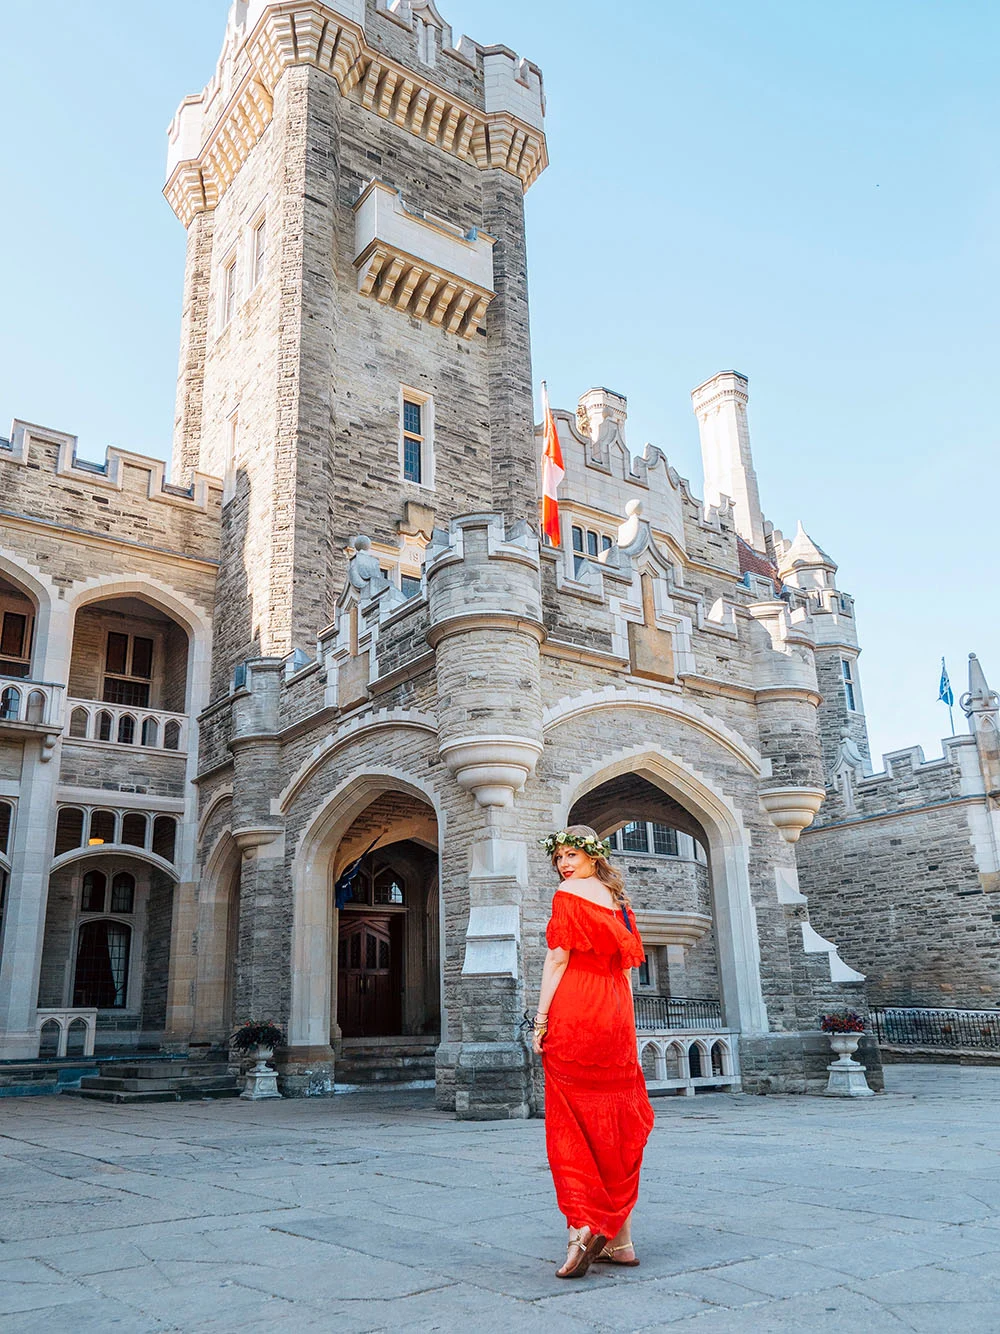 If you're planning on visiting Toronto soon and hoping to get some great photos while you're there, you definitely don't want to miss this guide on the most instagrammable places in Toronto, outdoor edition! This guide features all sorts of incredible outdoor photography locations in Toronto and the GTA. Pictured here: Casa Loma